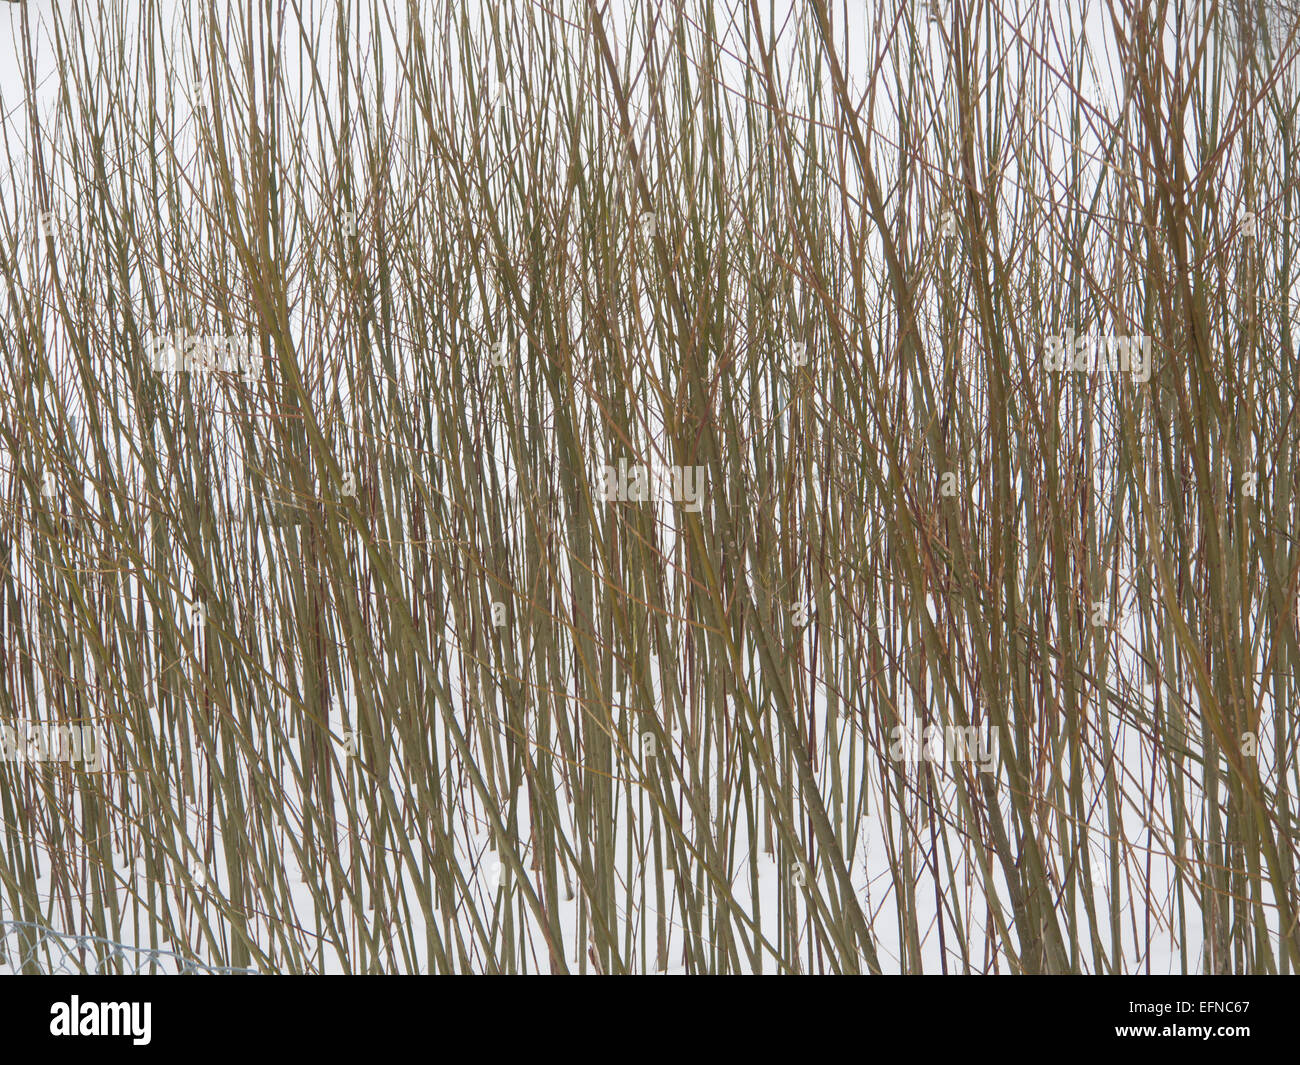 A salix species planted tightly as part of an effort to clear pollution and heavy metals in the soil, Oslo Norway Stock Photo